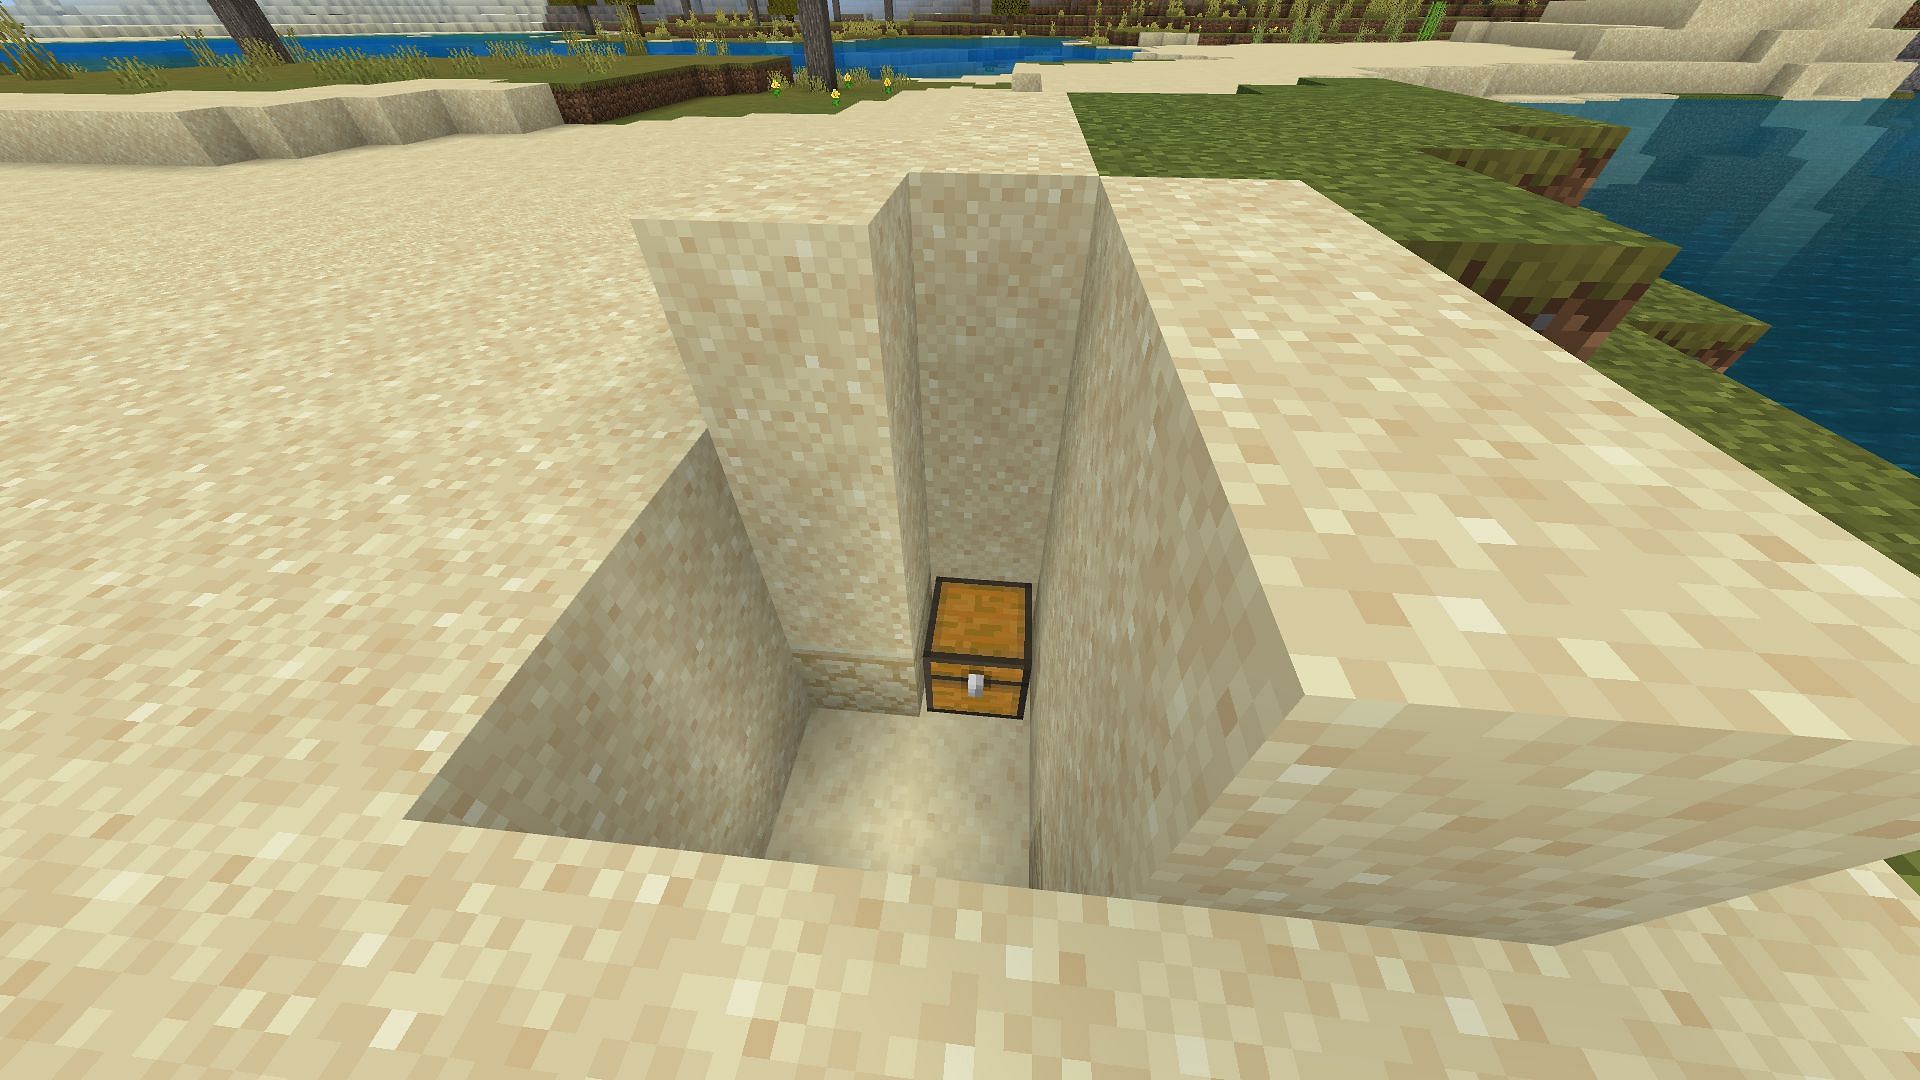 Buried treasure chest give players loads of useful items to get a headstart in Minecraft (Image via Mojang)